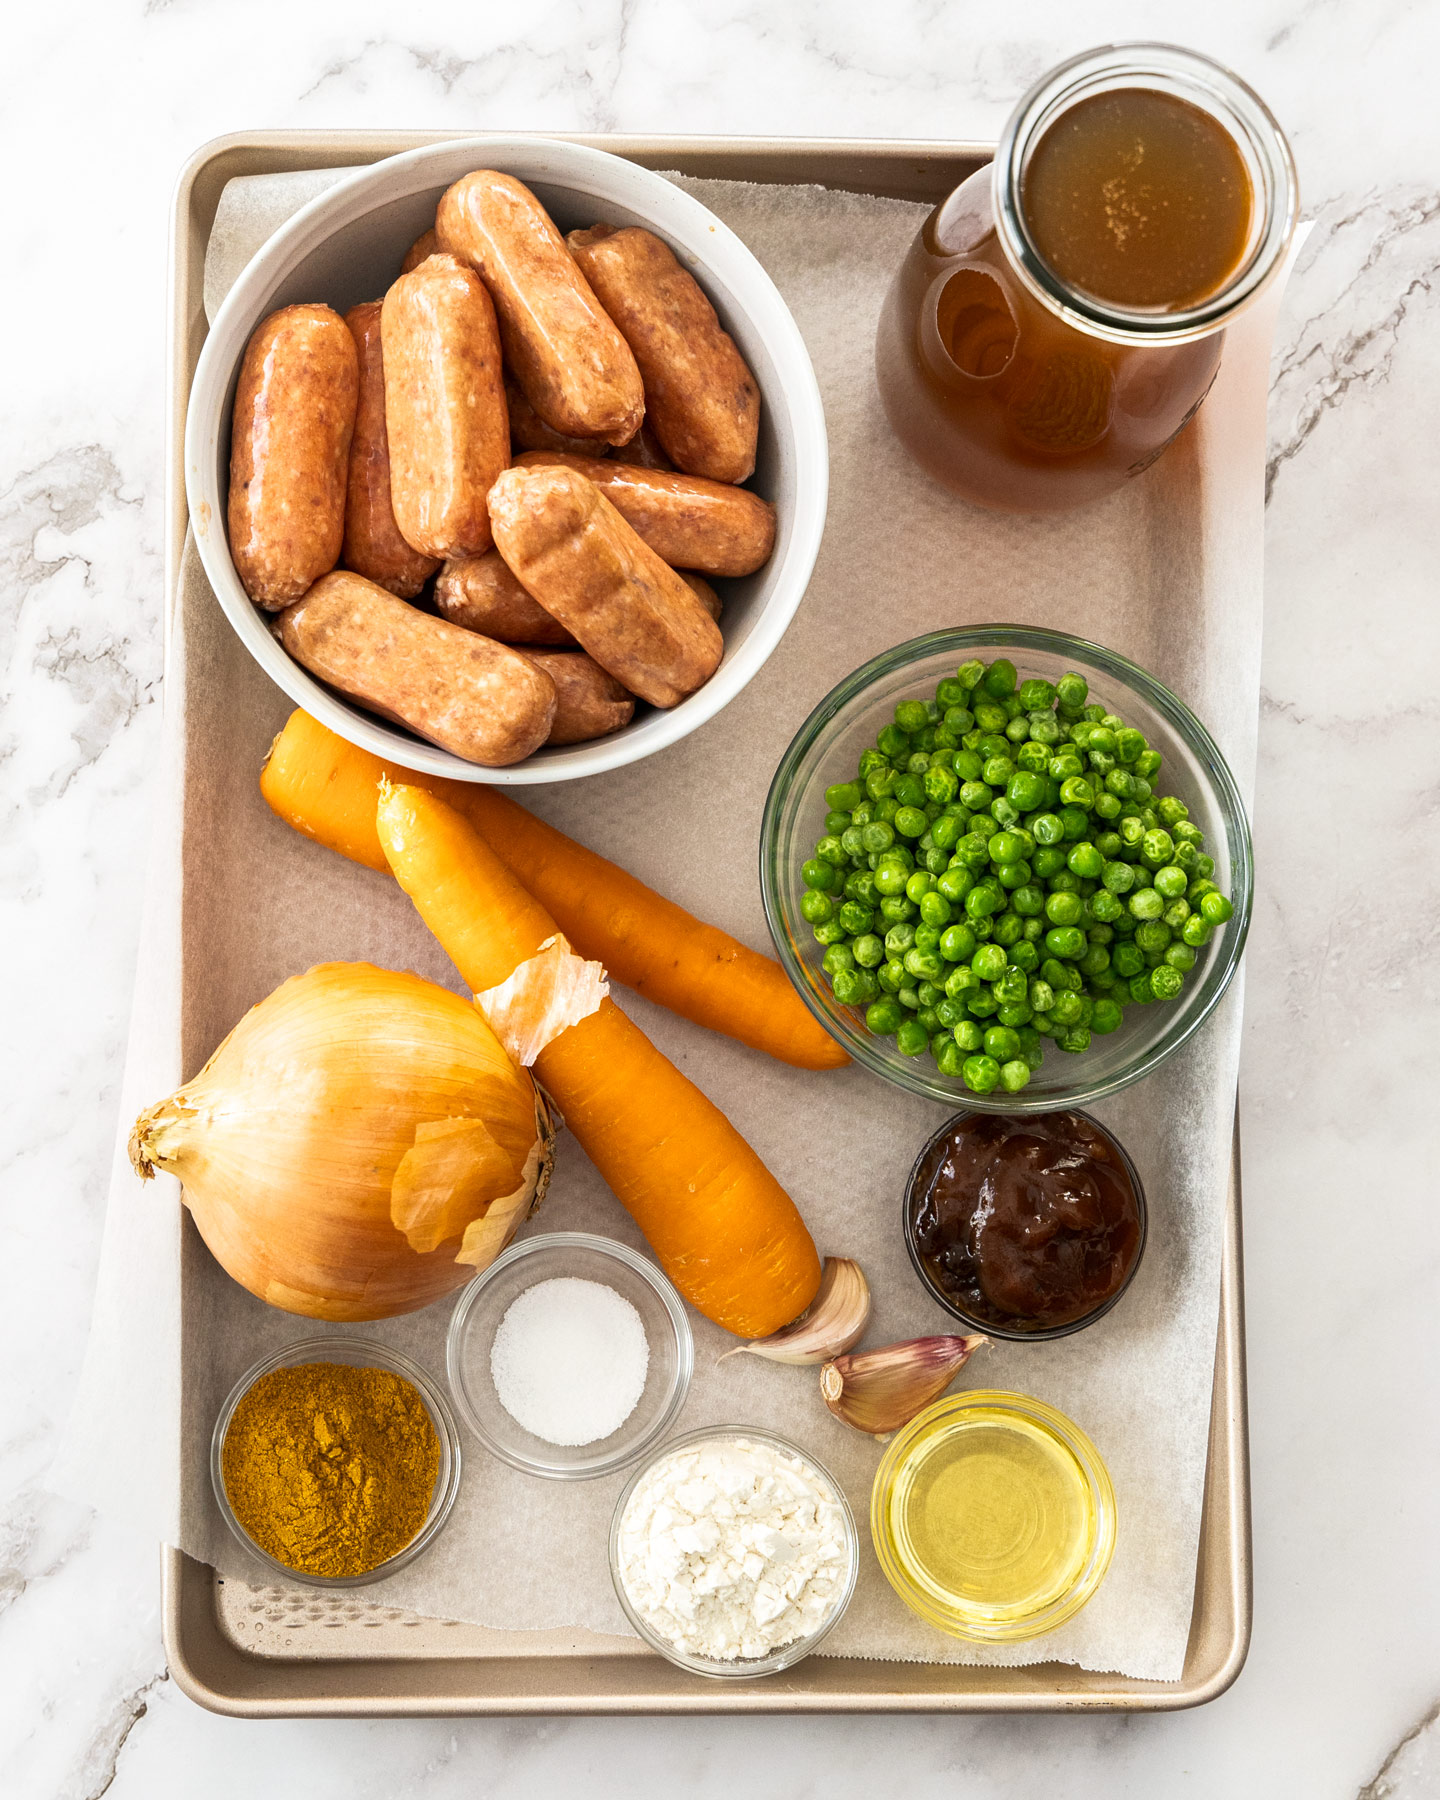 Ingredients for curried sausages on a baking tray.